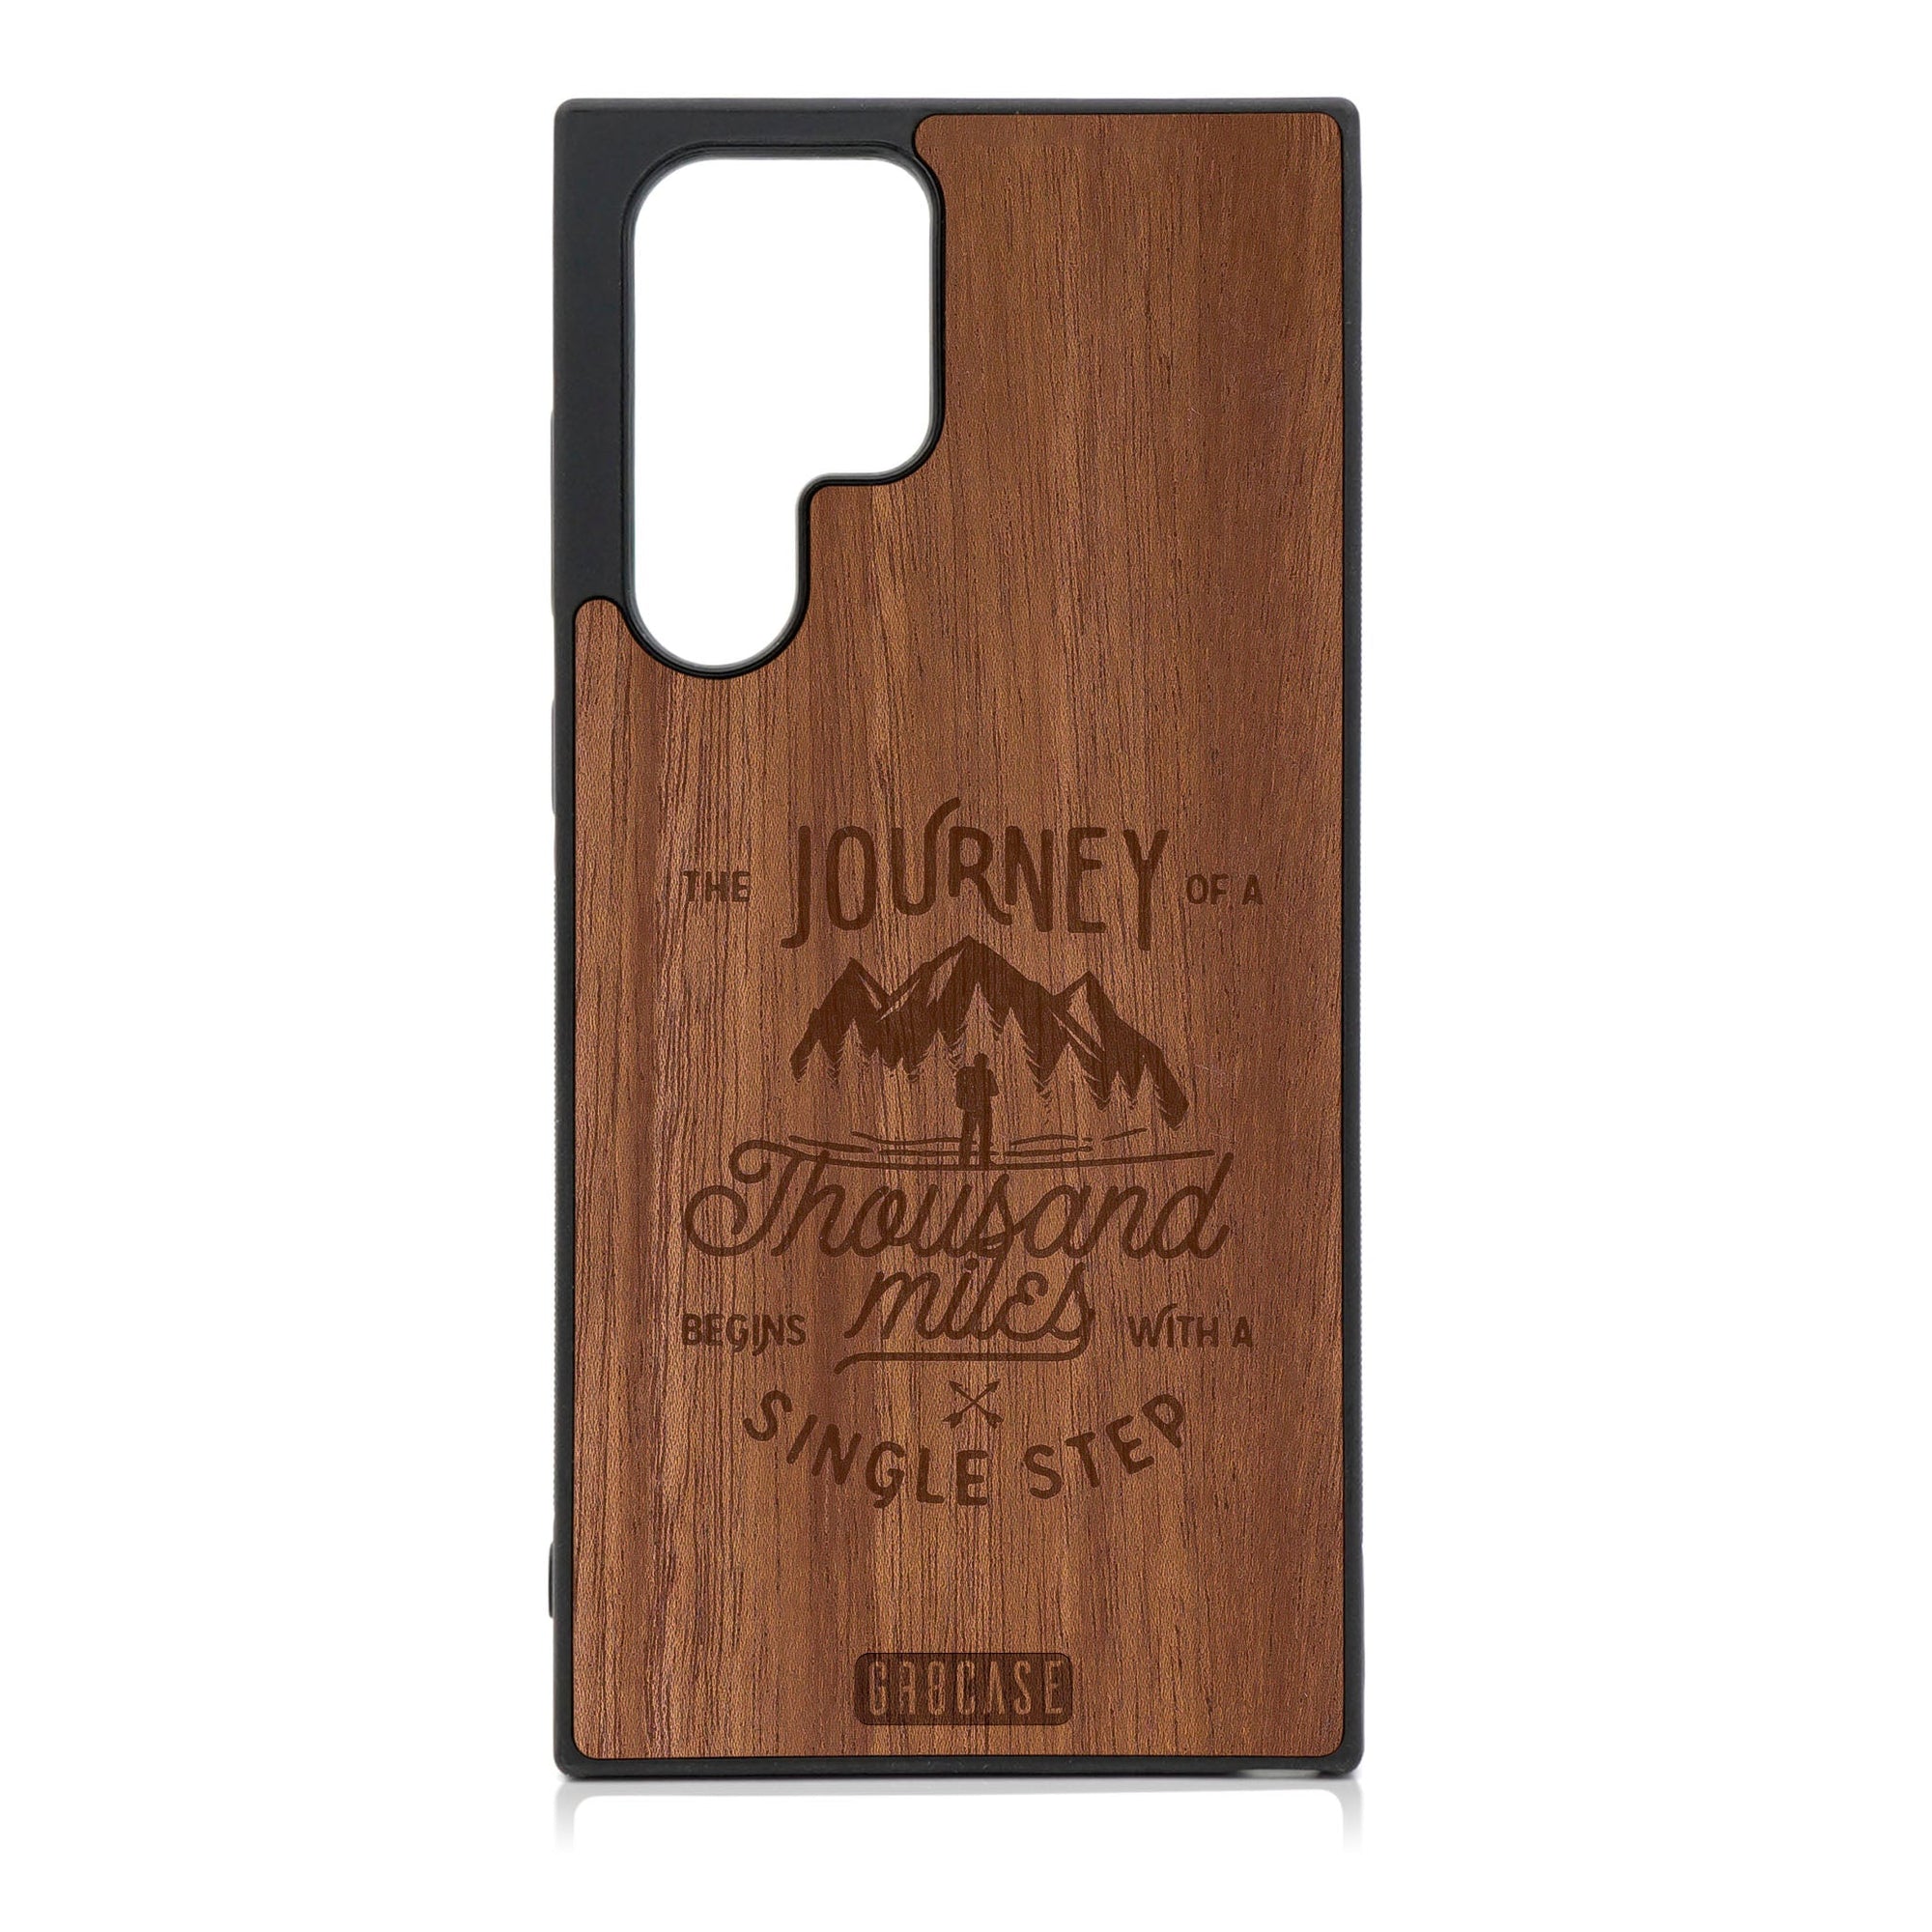 The Journey Of A Thousand Miles Begins With A Single Step Design Wood Case For Galaxy S23 Ultra